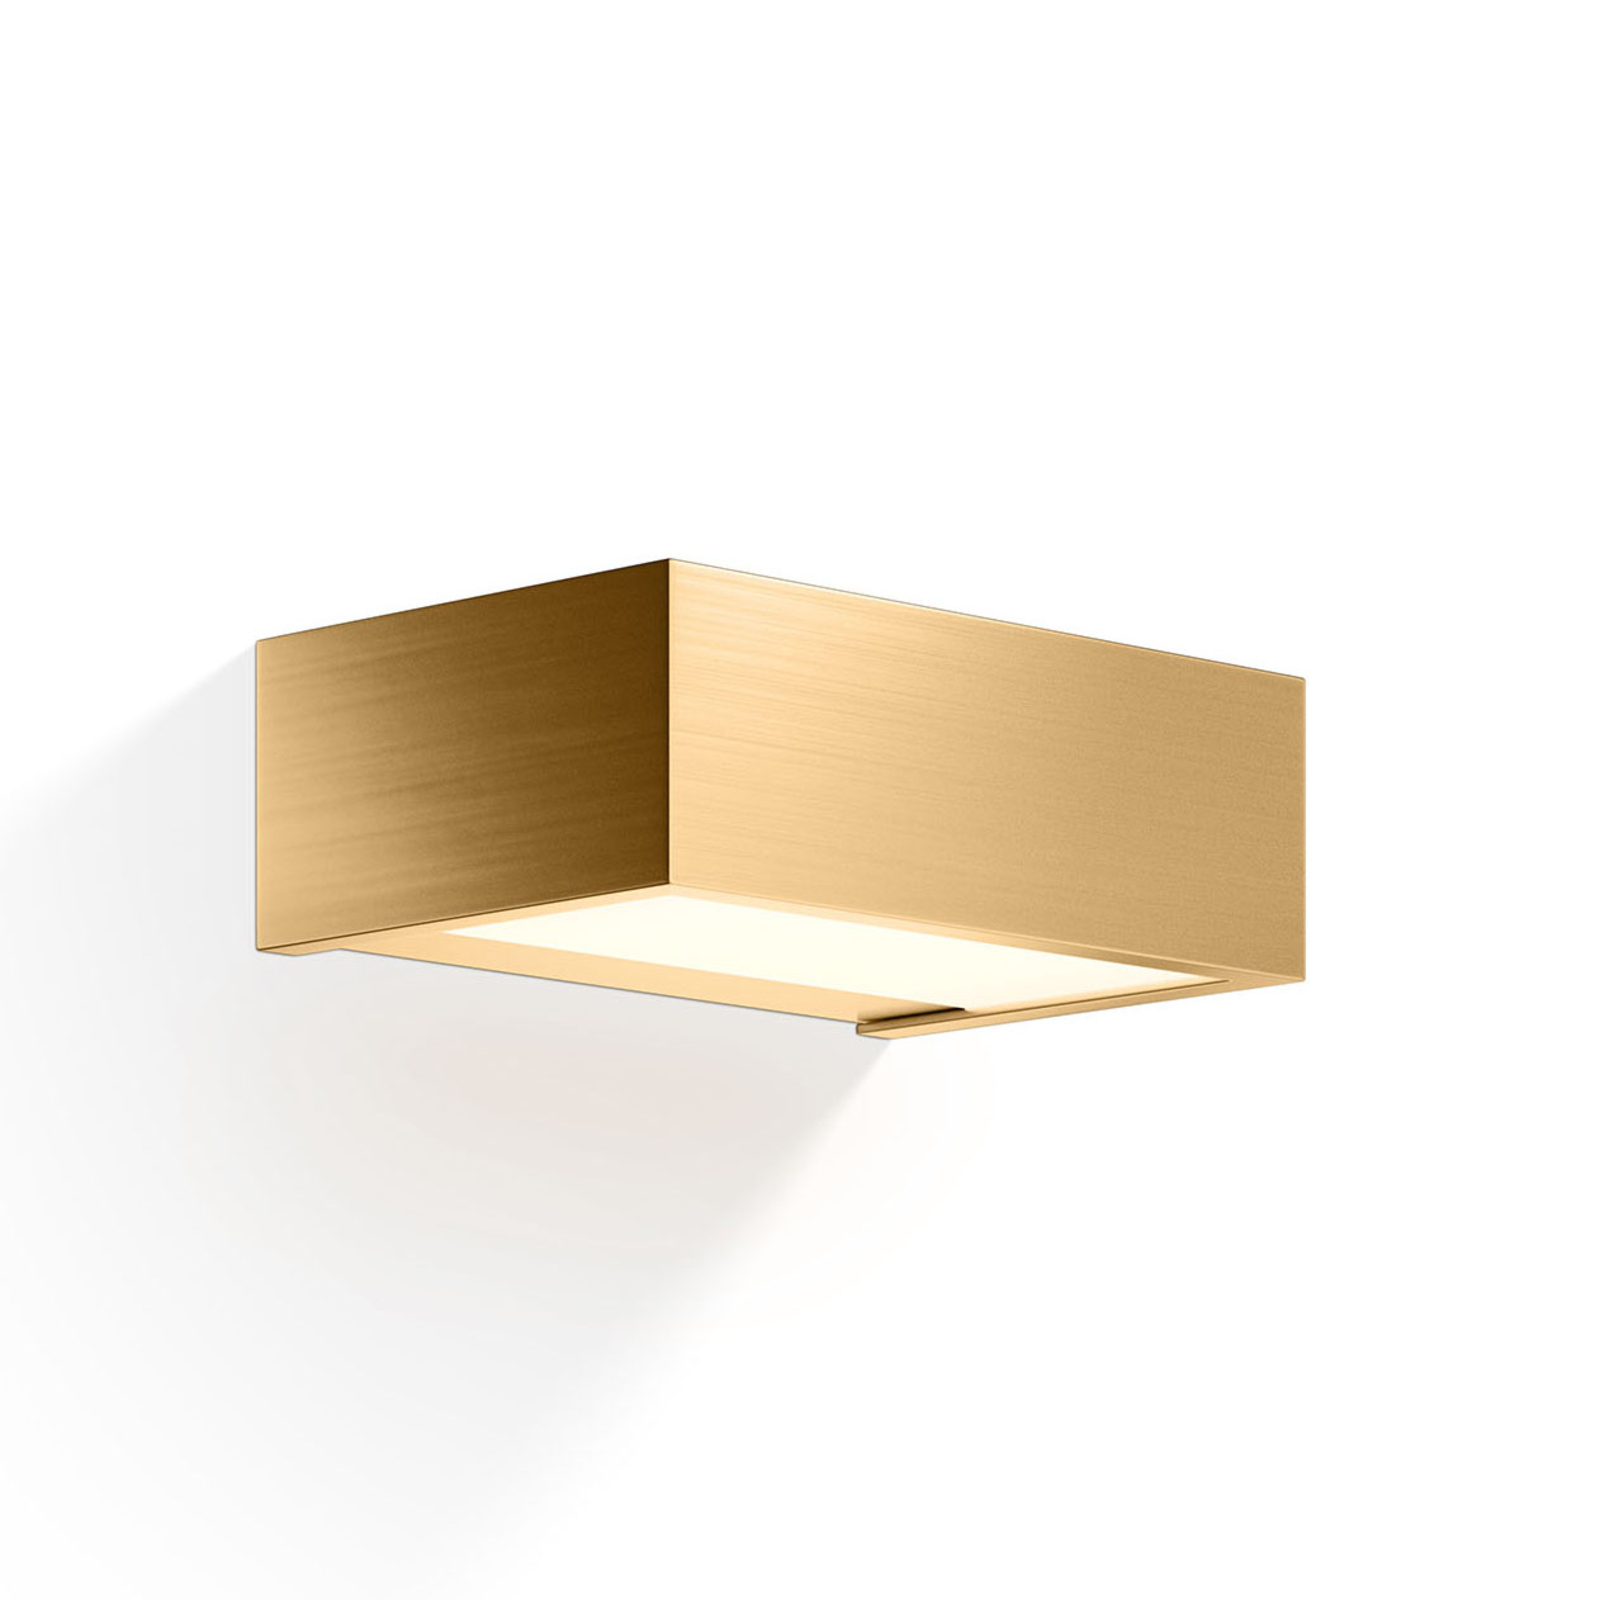 Decor Walther Box LED wall lamp gold 2,700K 15cm